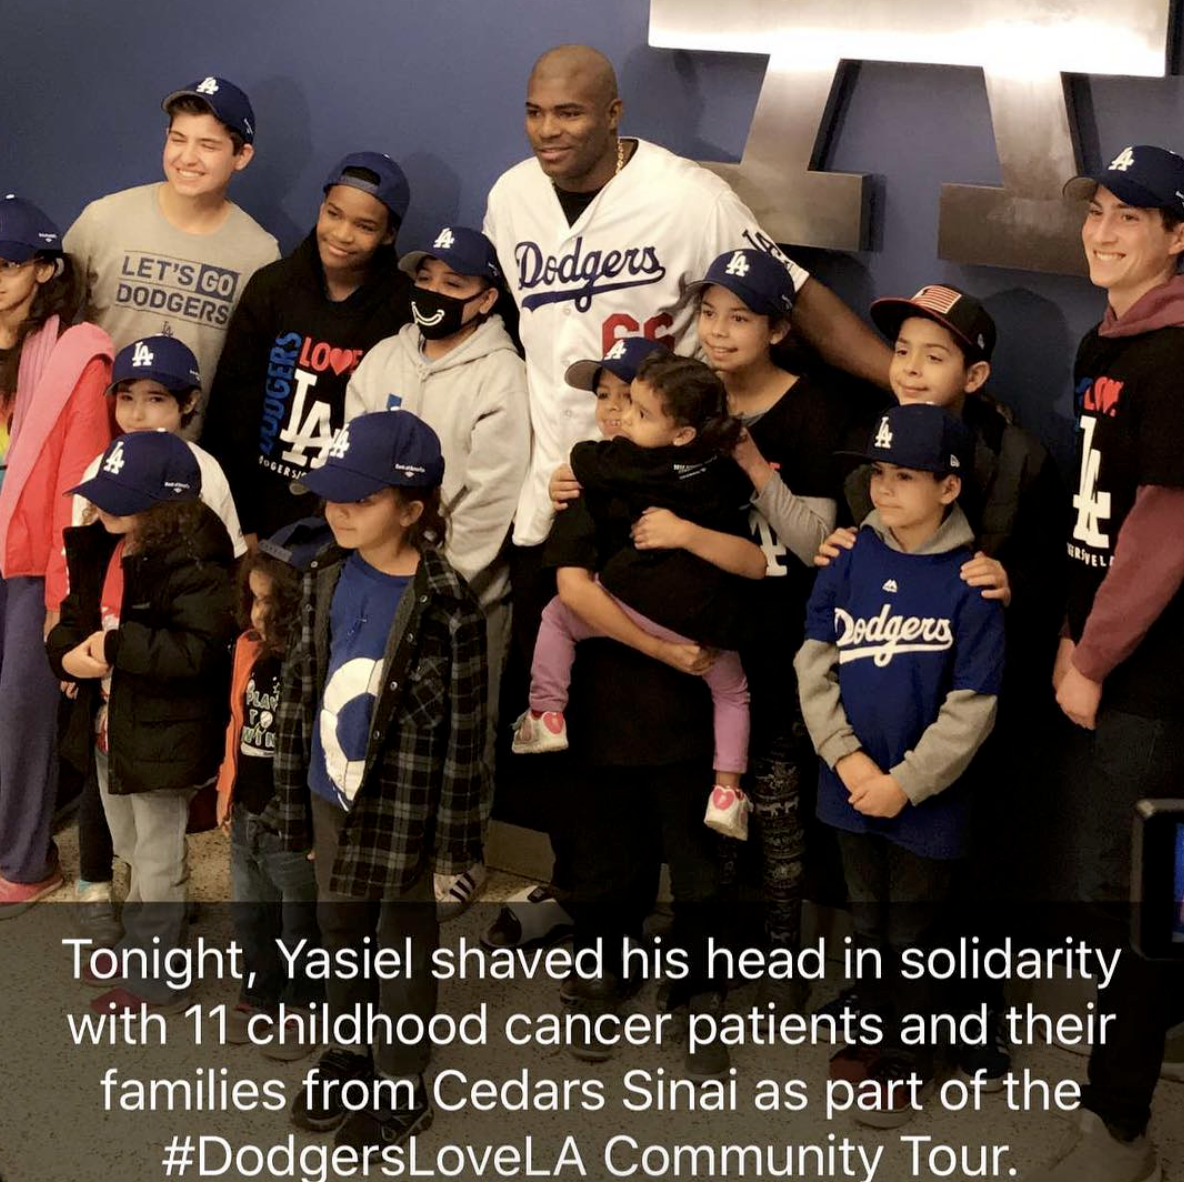 youth - Let'S Go Dodgers Dodgers Dodaers Tonight, Yasiel shaved his head in solidarity with 11 childhood cancer patients and their families from Cedars Sinai as part of the Community Tour.